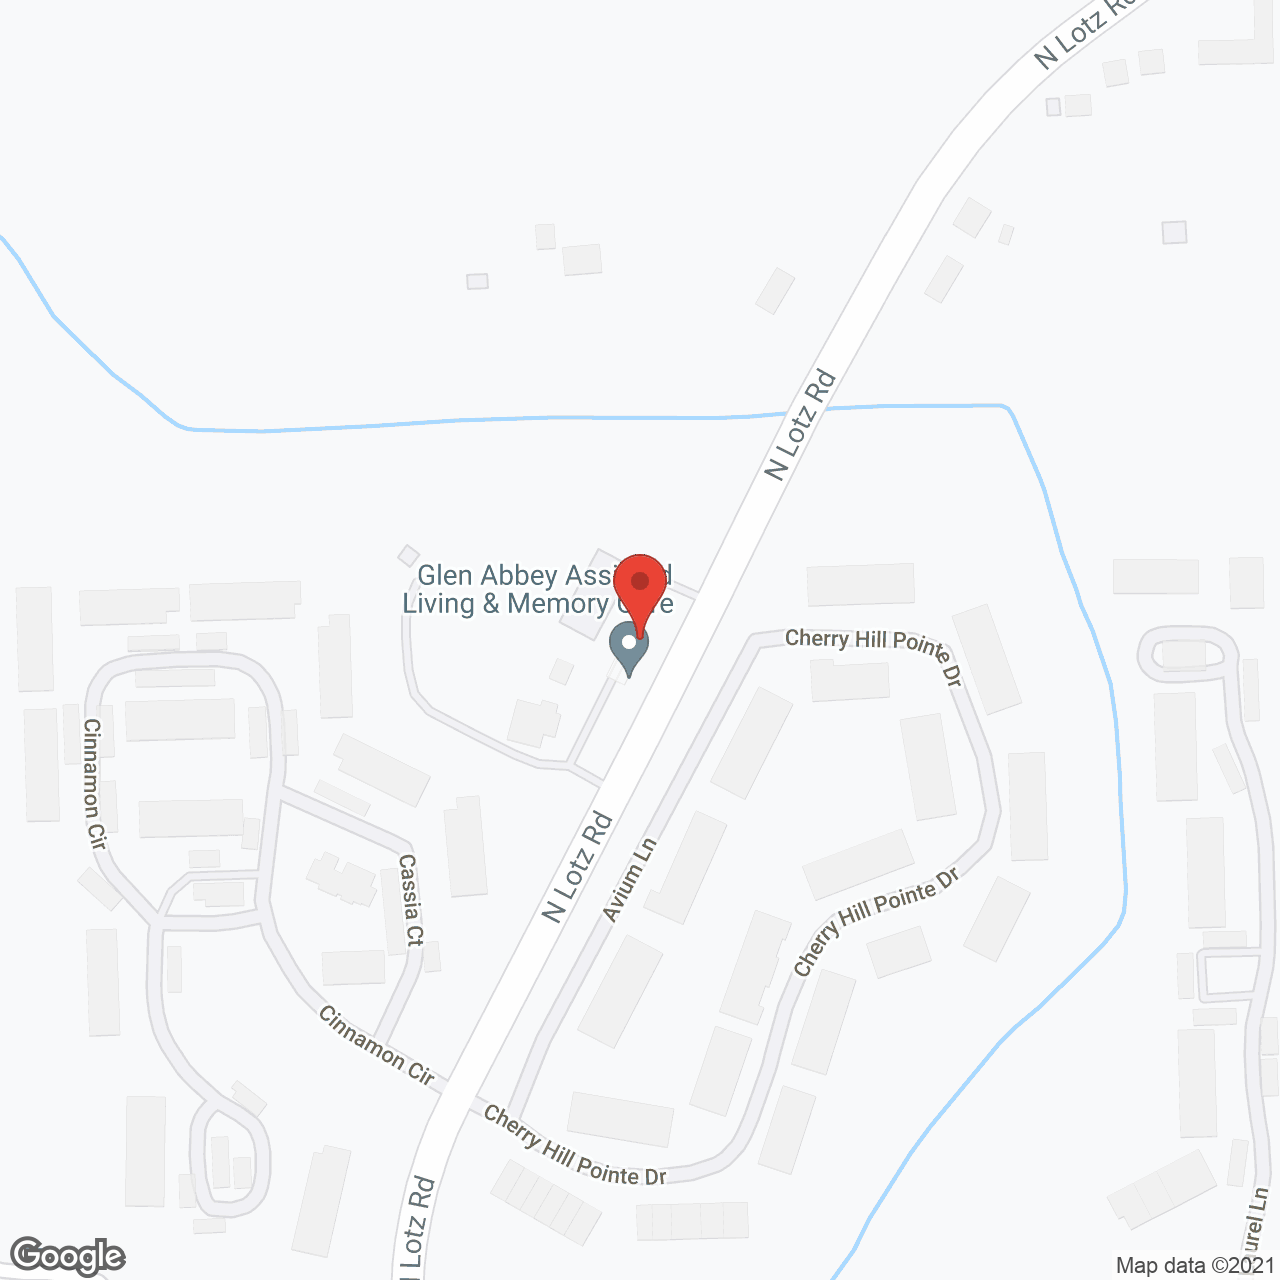 Glen Abbey Assisted Living & Memory Care in google map